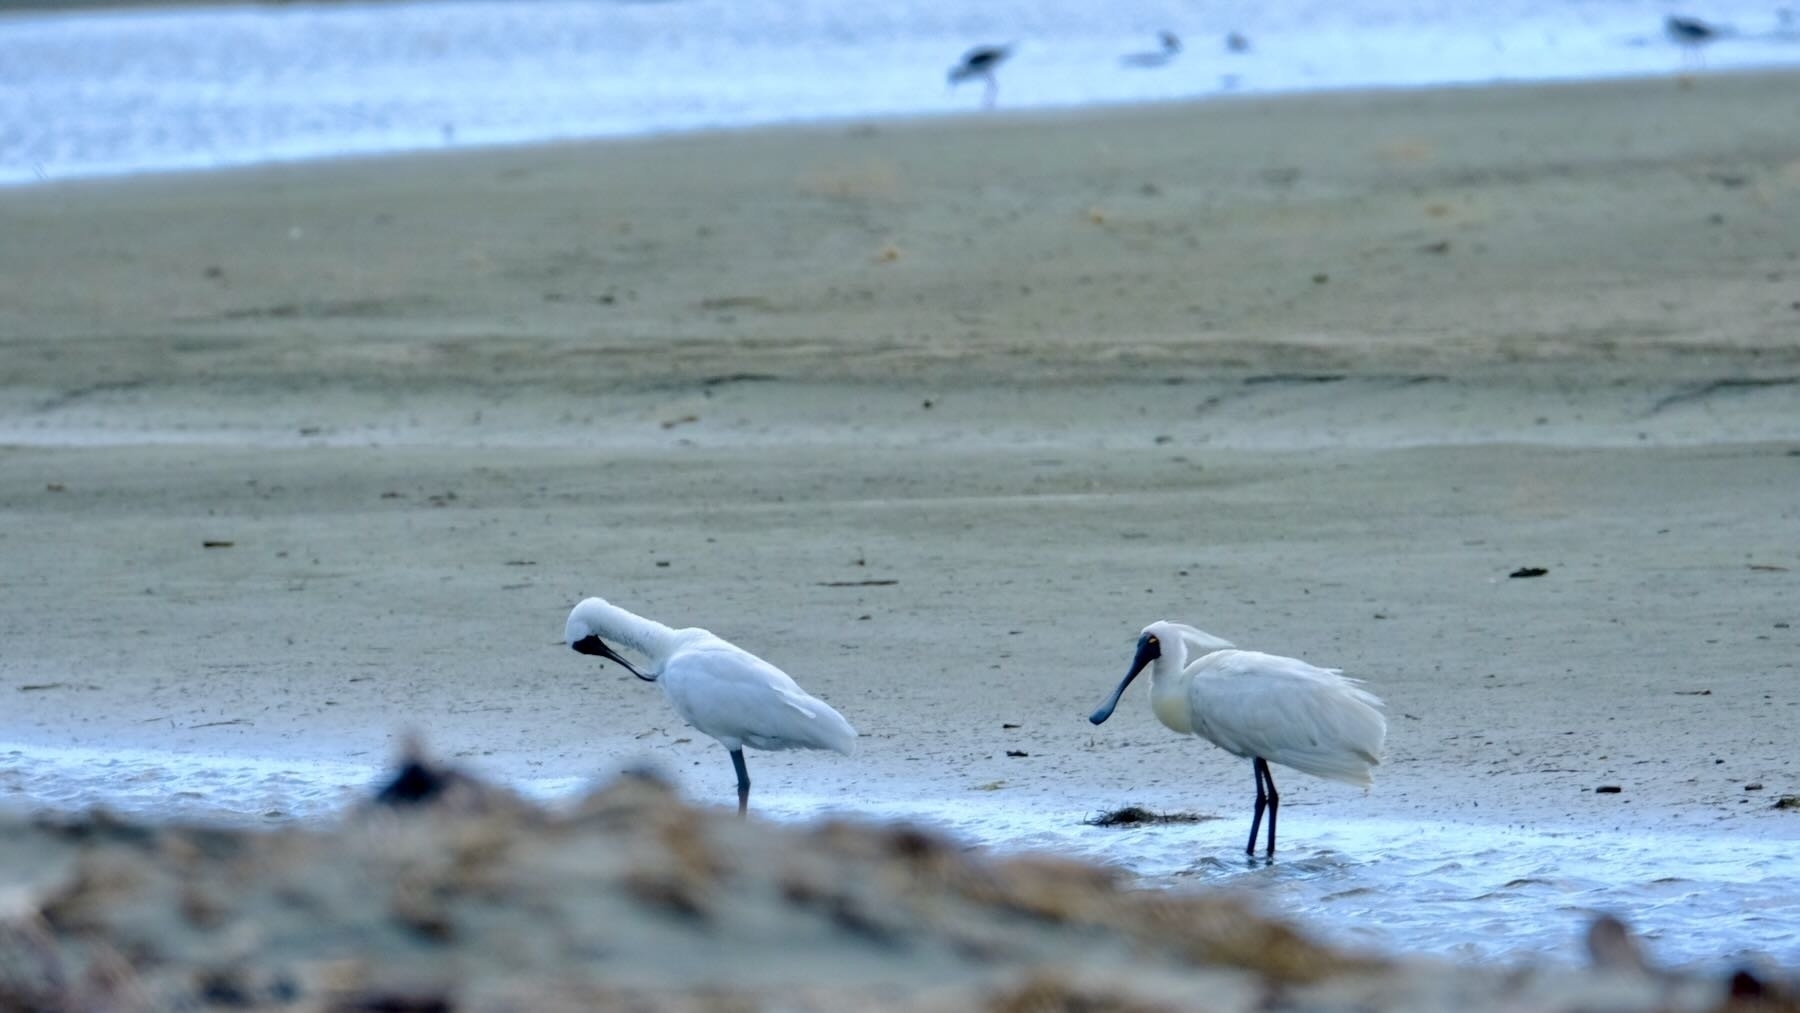 Two spoonbills on damp sand. 